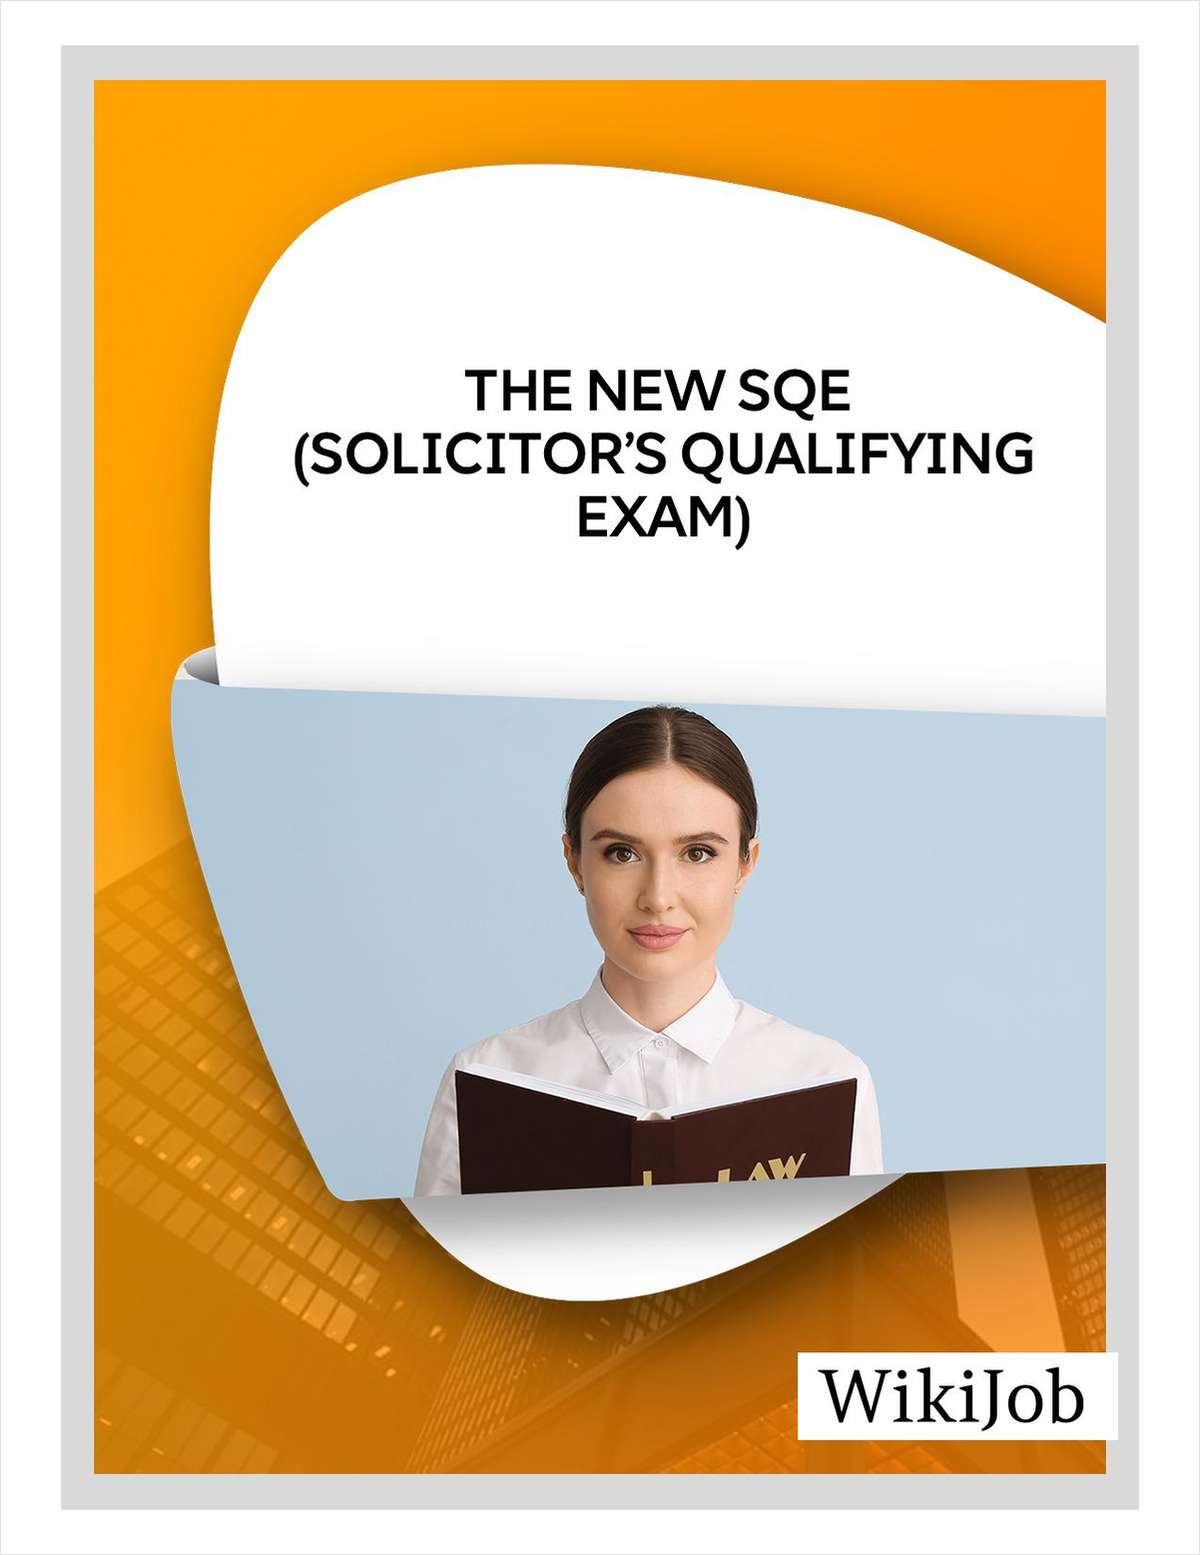 The New SQE (Solicitor's Qualifying Exam)